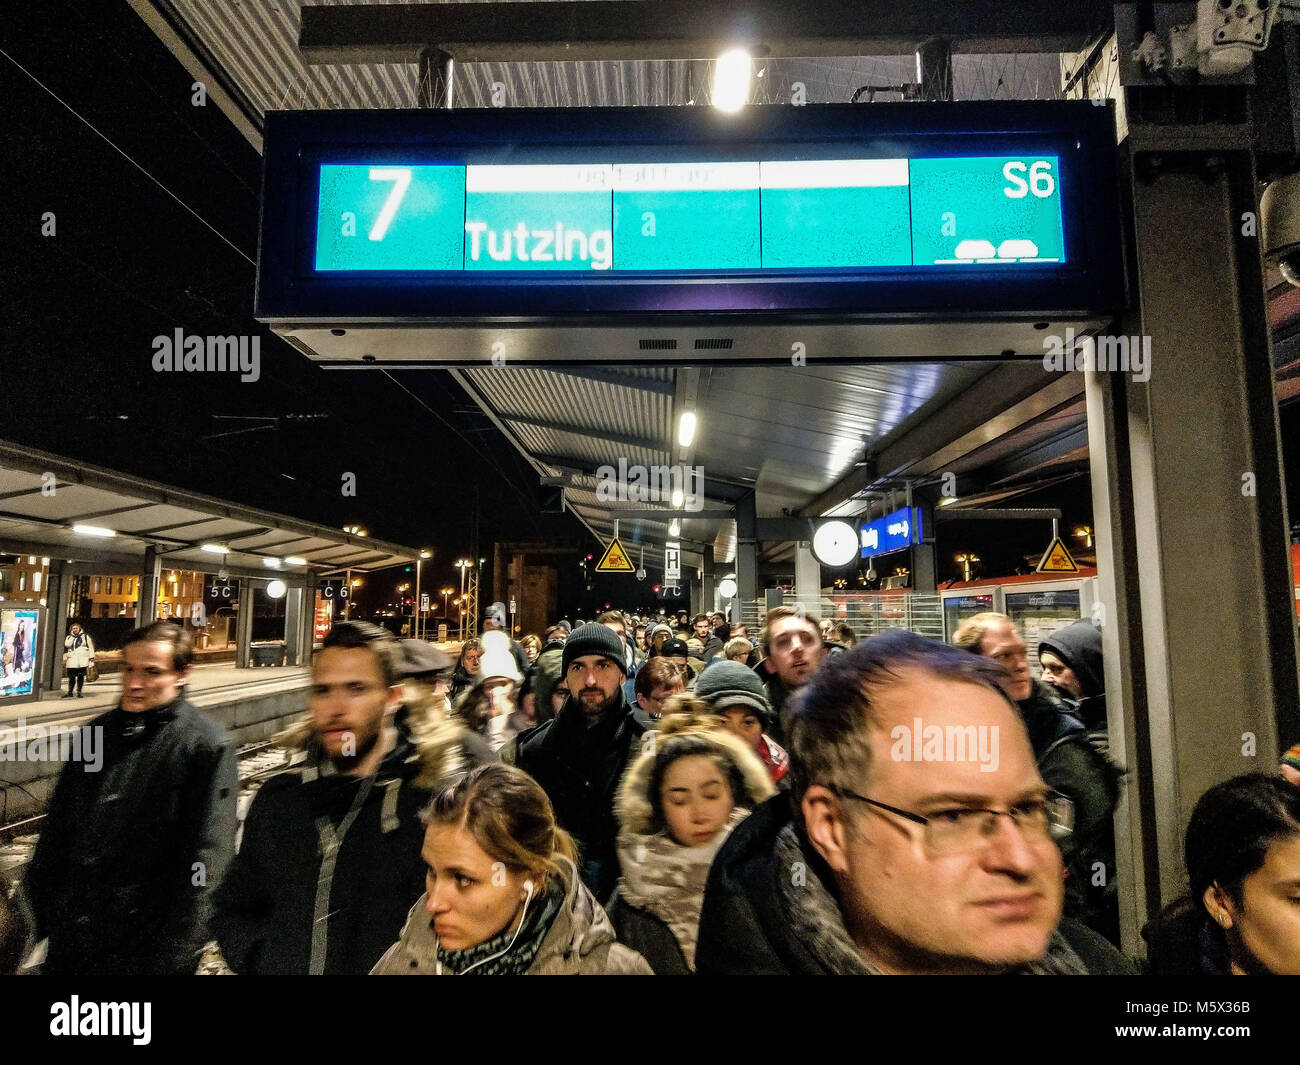 Munich, Bavaria, Germany. 26th Feb, 2018. The platform at the Pasing station, where thousands of riders hoped to find connections to get home. Due to a failed overhead powerline at Munich's Pasing train station, yet another failure of the overburdened S-Bahn train system in the city caused chaos that is persisting some 12 hours after the initial failure. Continuing on are complete shutdowns of the system as of 19:00 local time, with slow, limited, intermittent service in between. On the platforms one may seen thousands of people tryng to get home with no replacement services available. Stock Photo